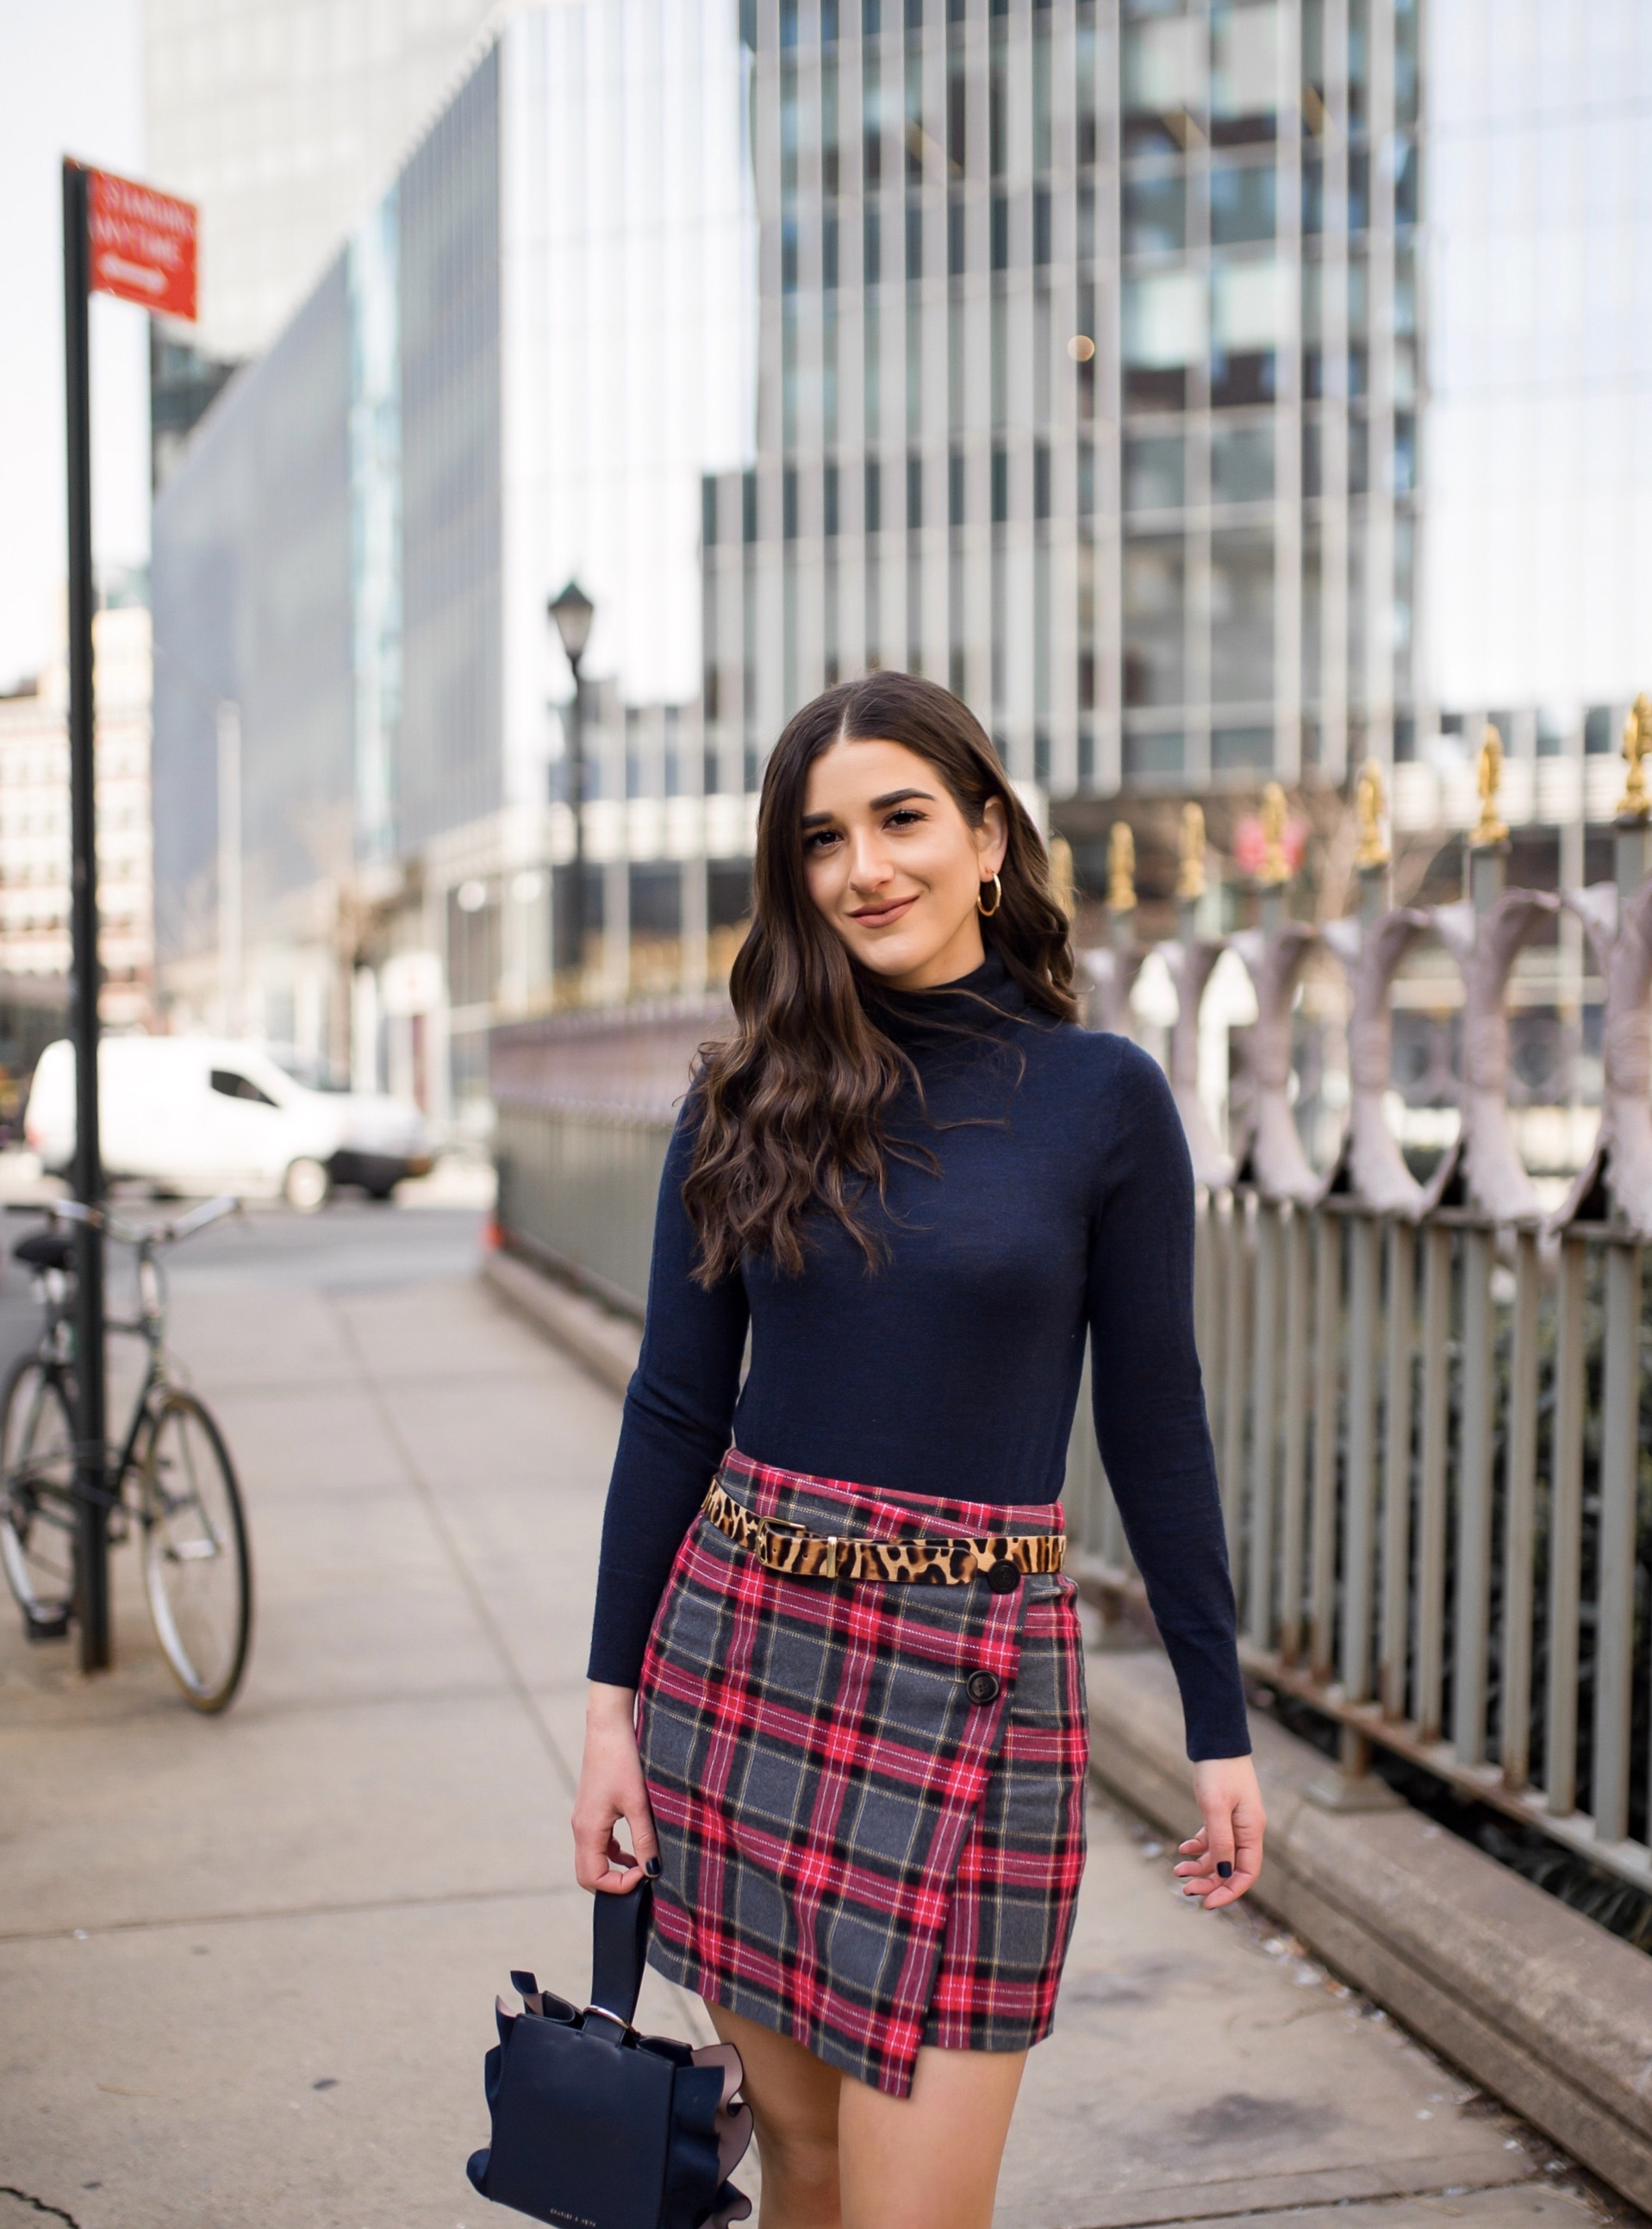 How NYFW Changed From My 1st To 12th Season Plaid Skirt Red Heels Esther Santer Fashion Blog NYC Street Style Blogger Outfit OOTD Trendy Shopping Navy Turtleneck Hair Goals Wear Winter Fall Shop Jcrew H&M Banana Republic Leopard Belt Accessories  Bag.jpg